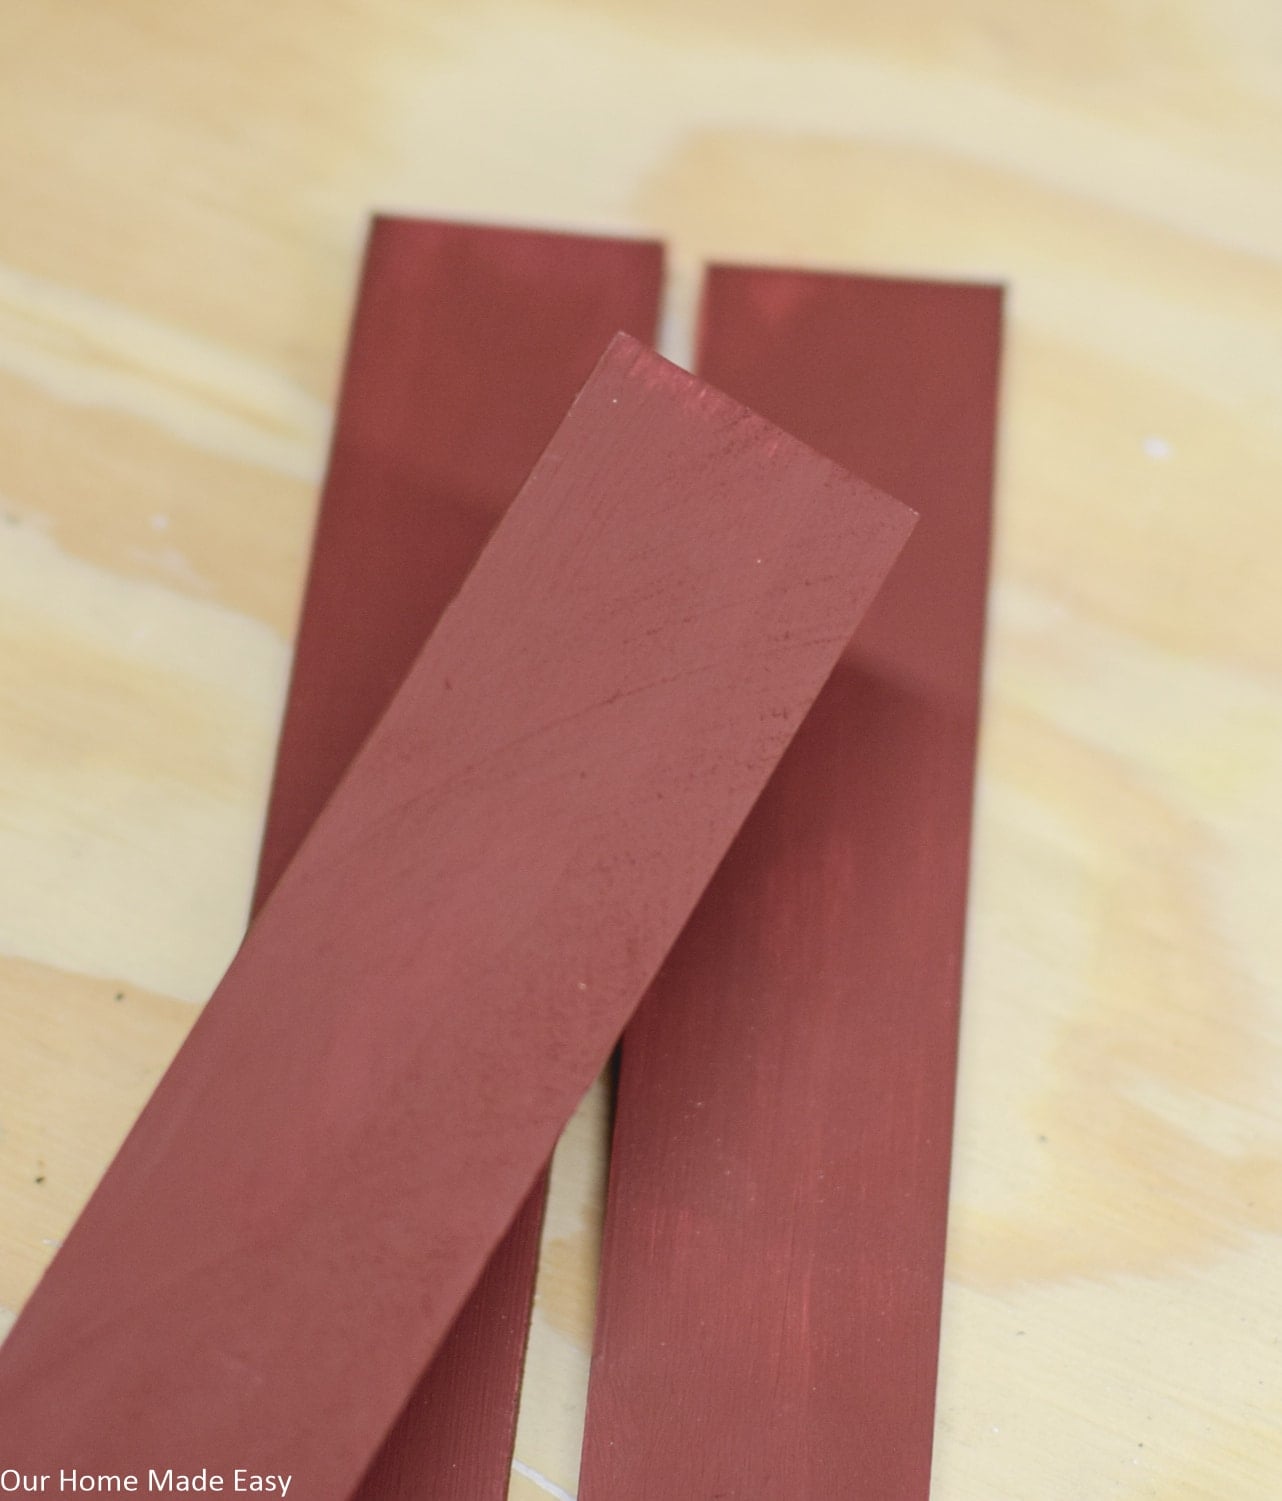 Paint the wood pieces to the color of your choice after cutting